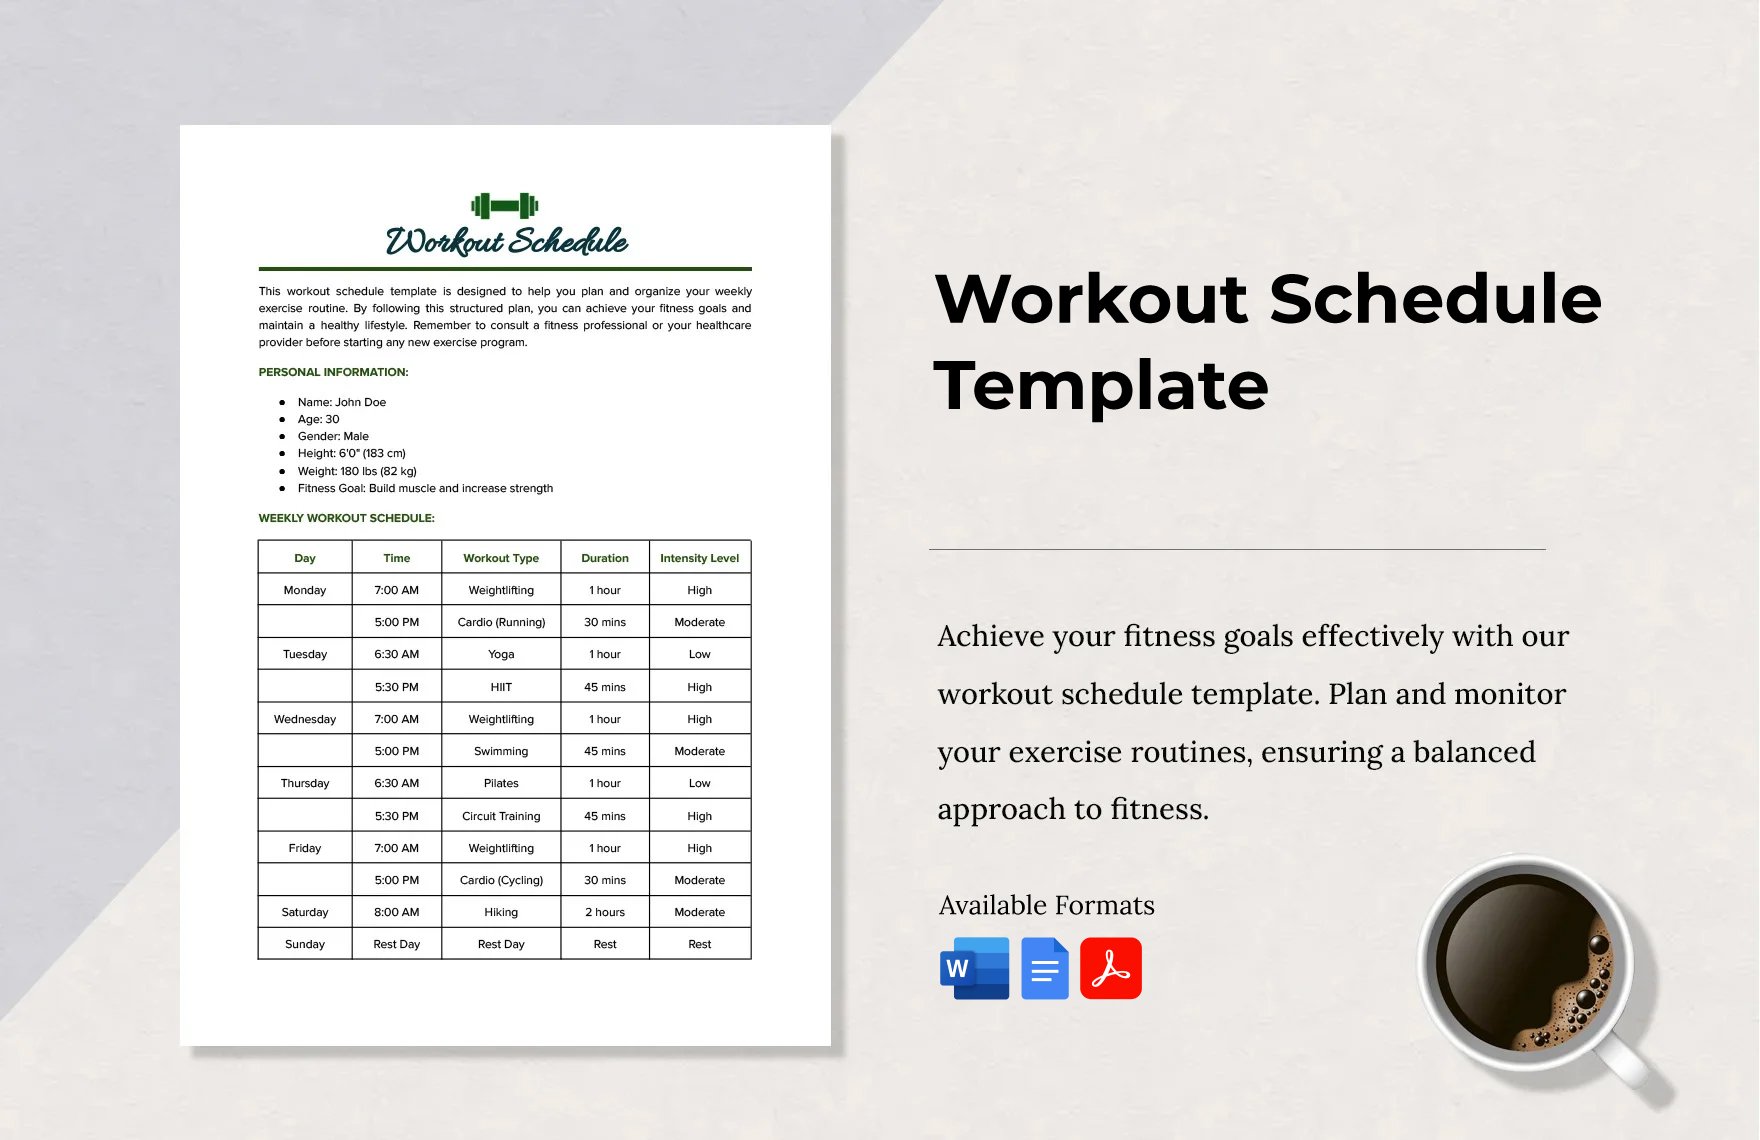 Workout Schedule Template in Word, Google Docs, PDF